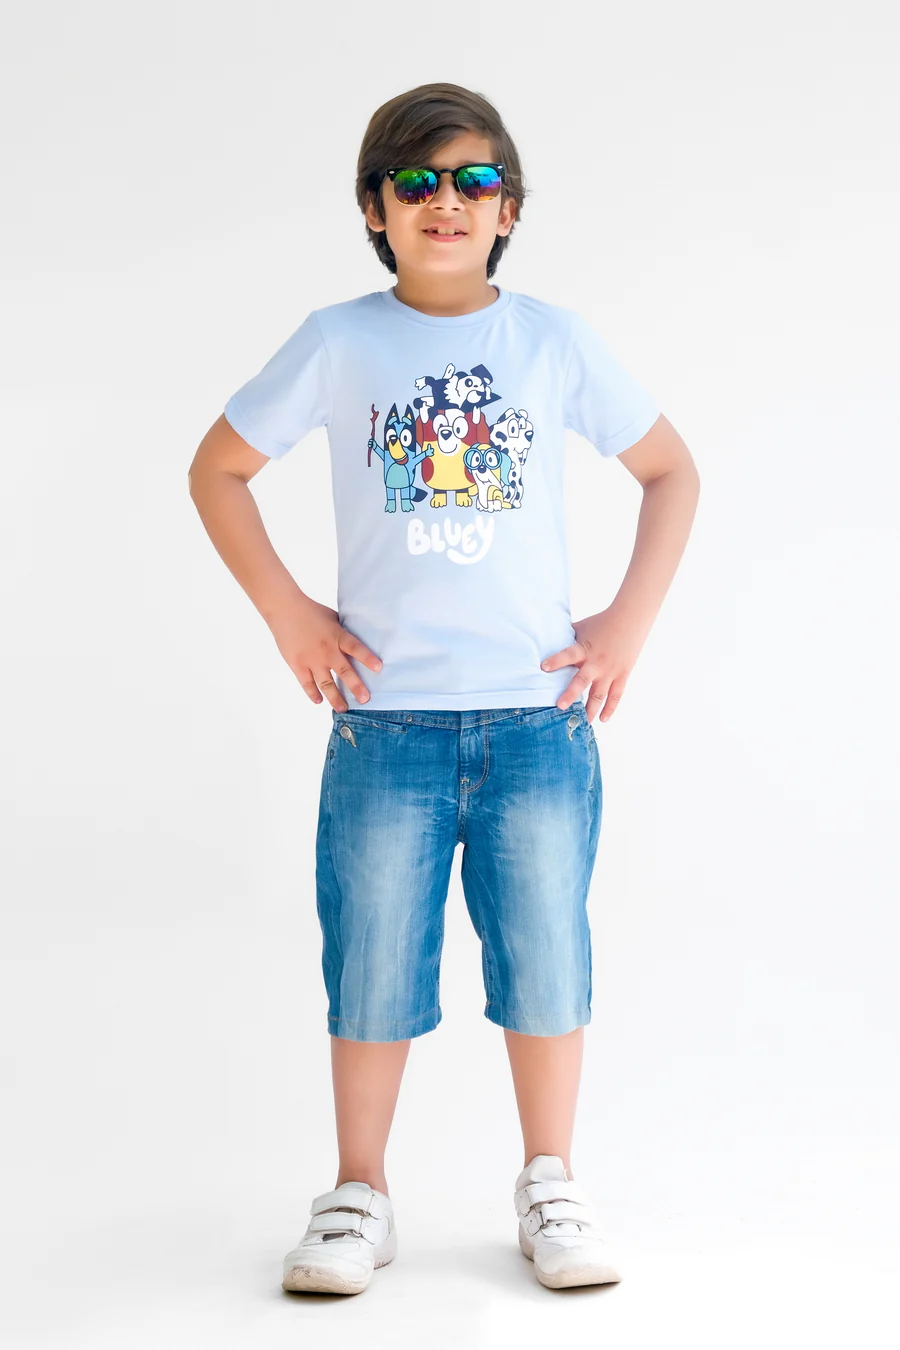 Dogs Life Half Sleeves T-Shirts For Kids - Sky Blue